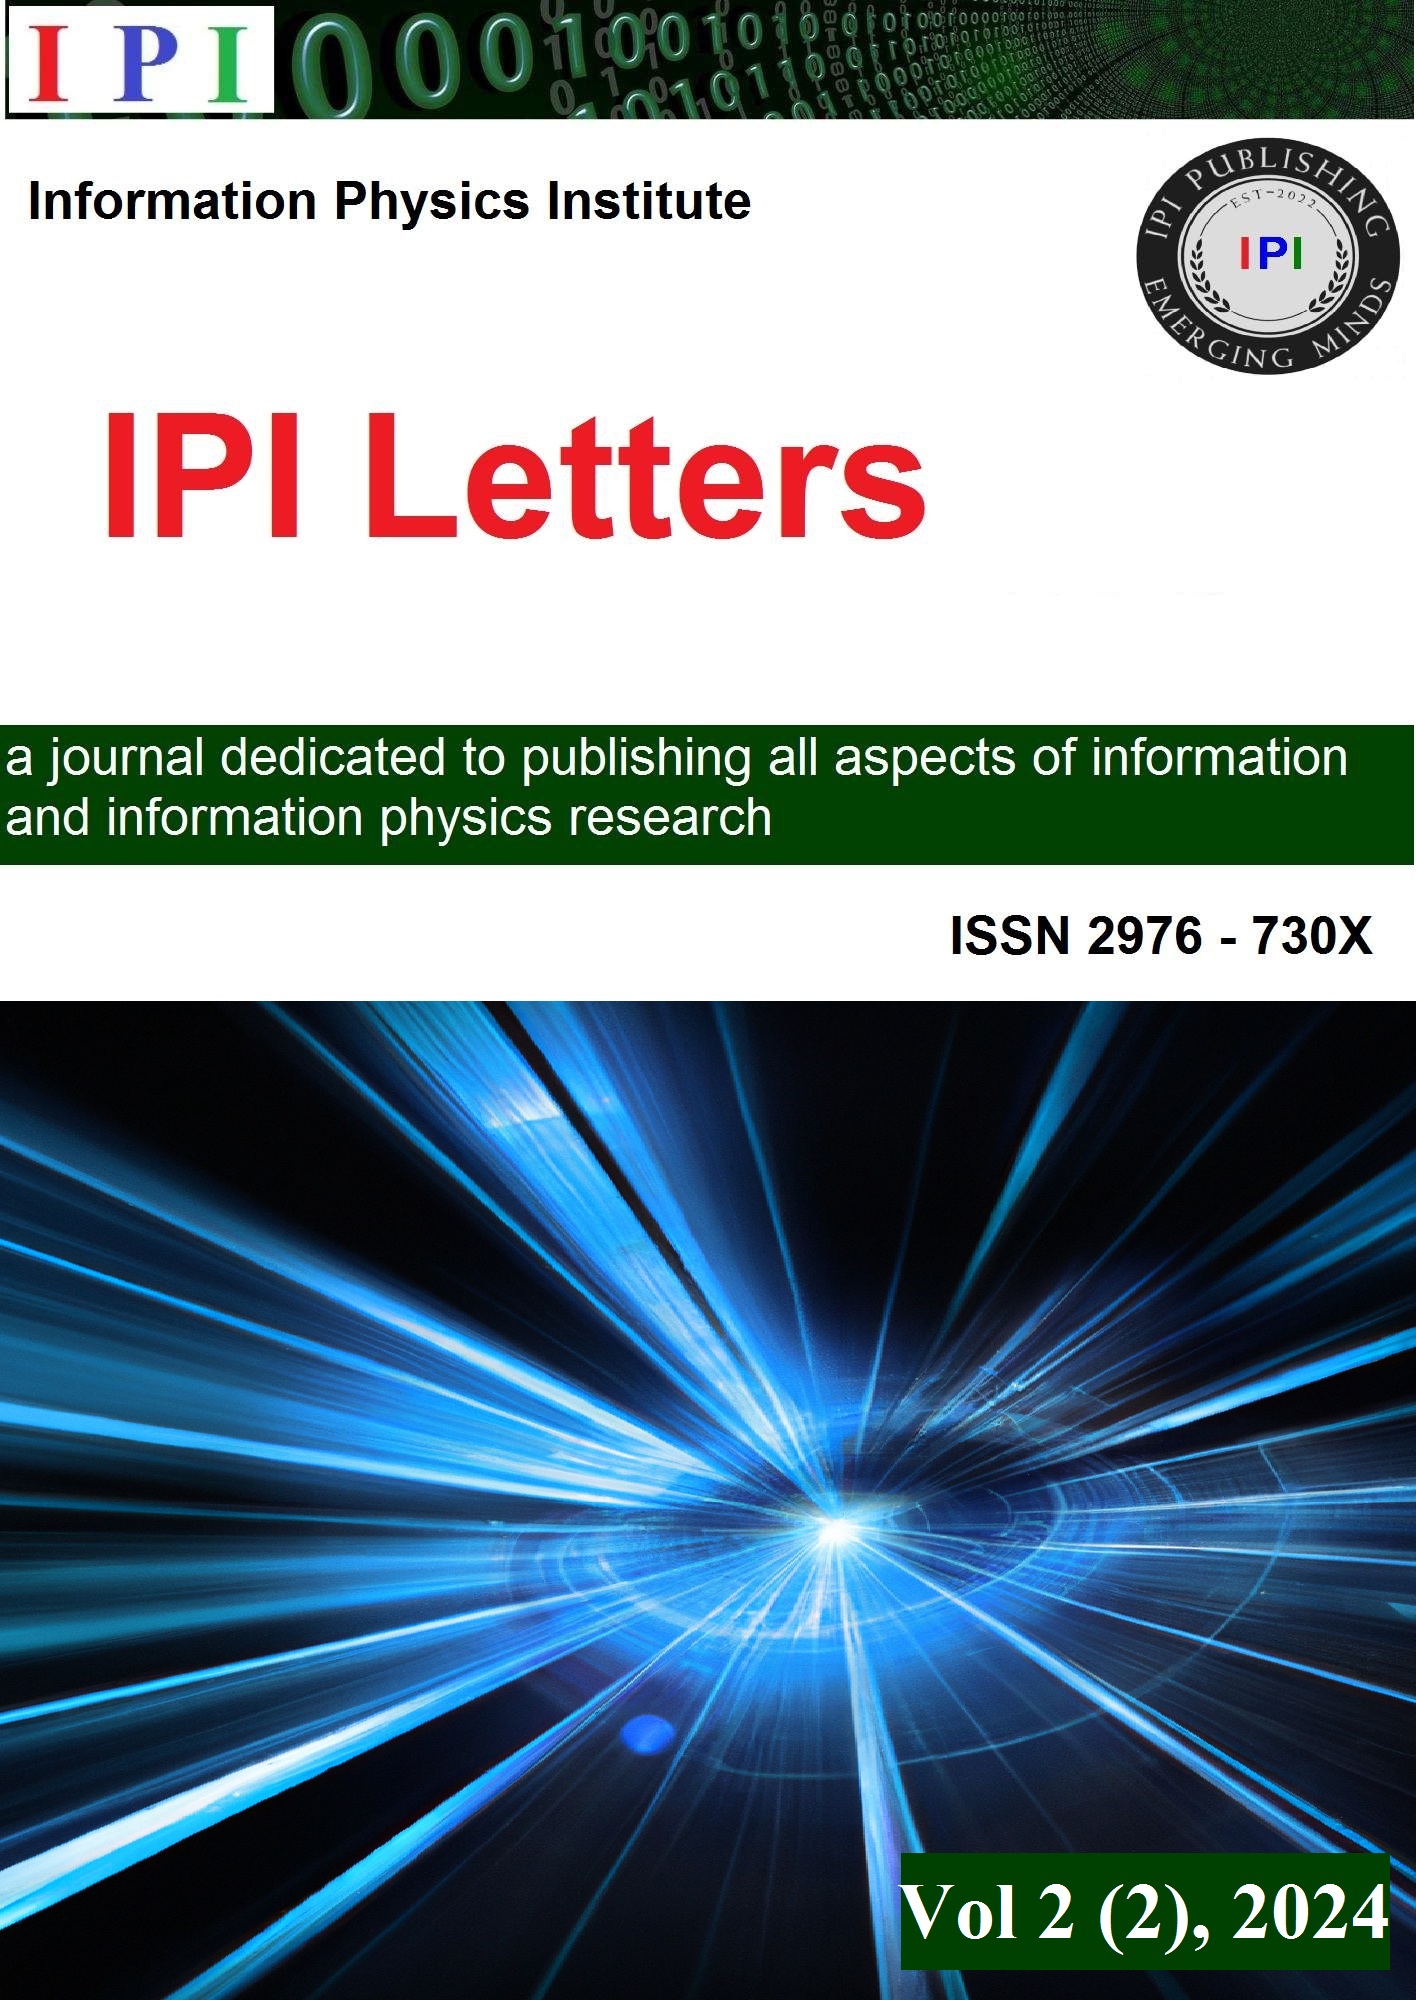 					View IPI Letters, Vol. 2 (2) 2024
				